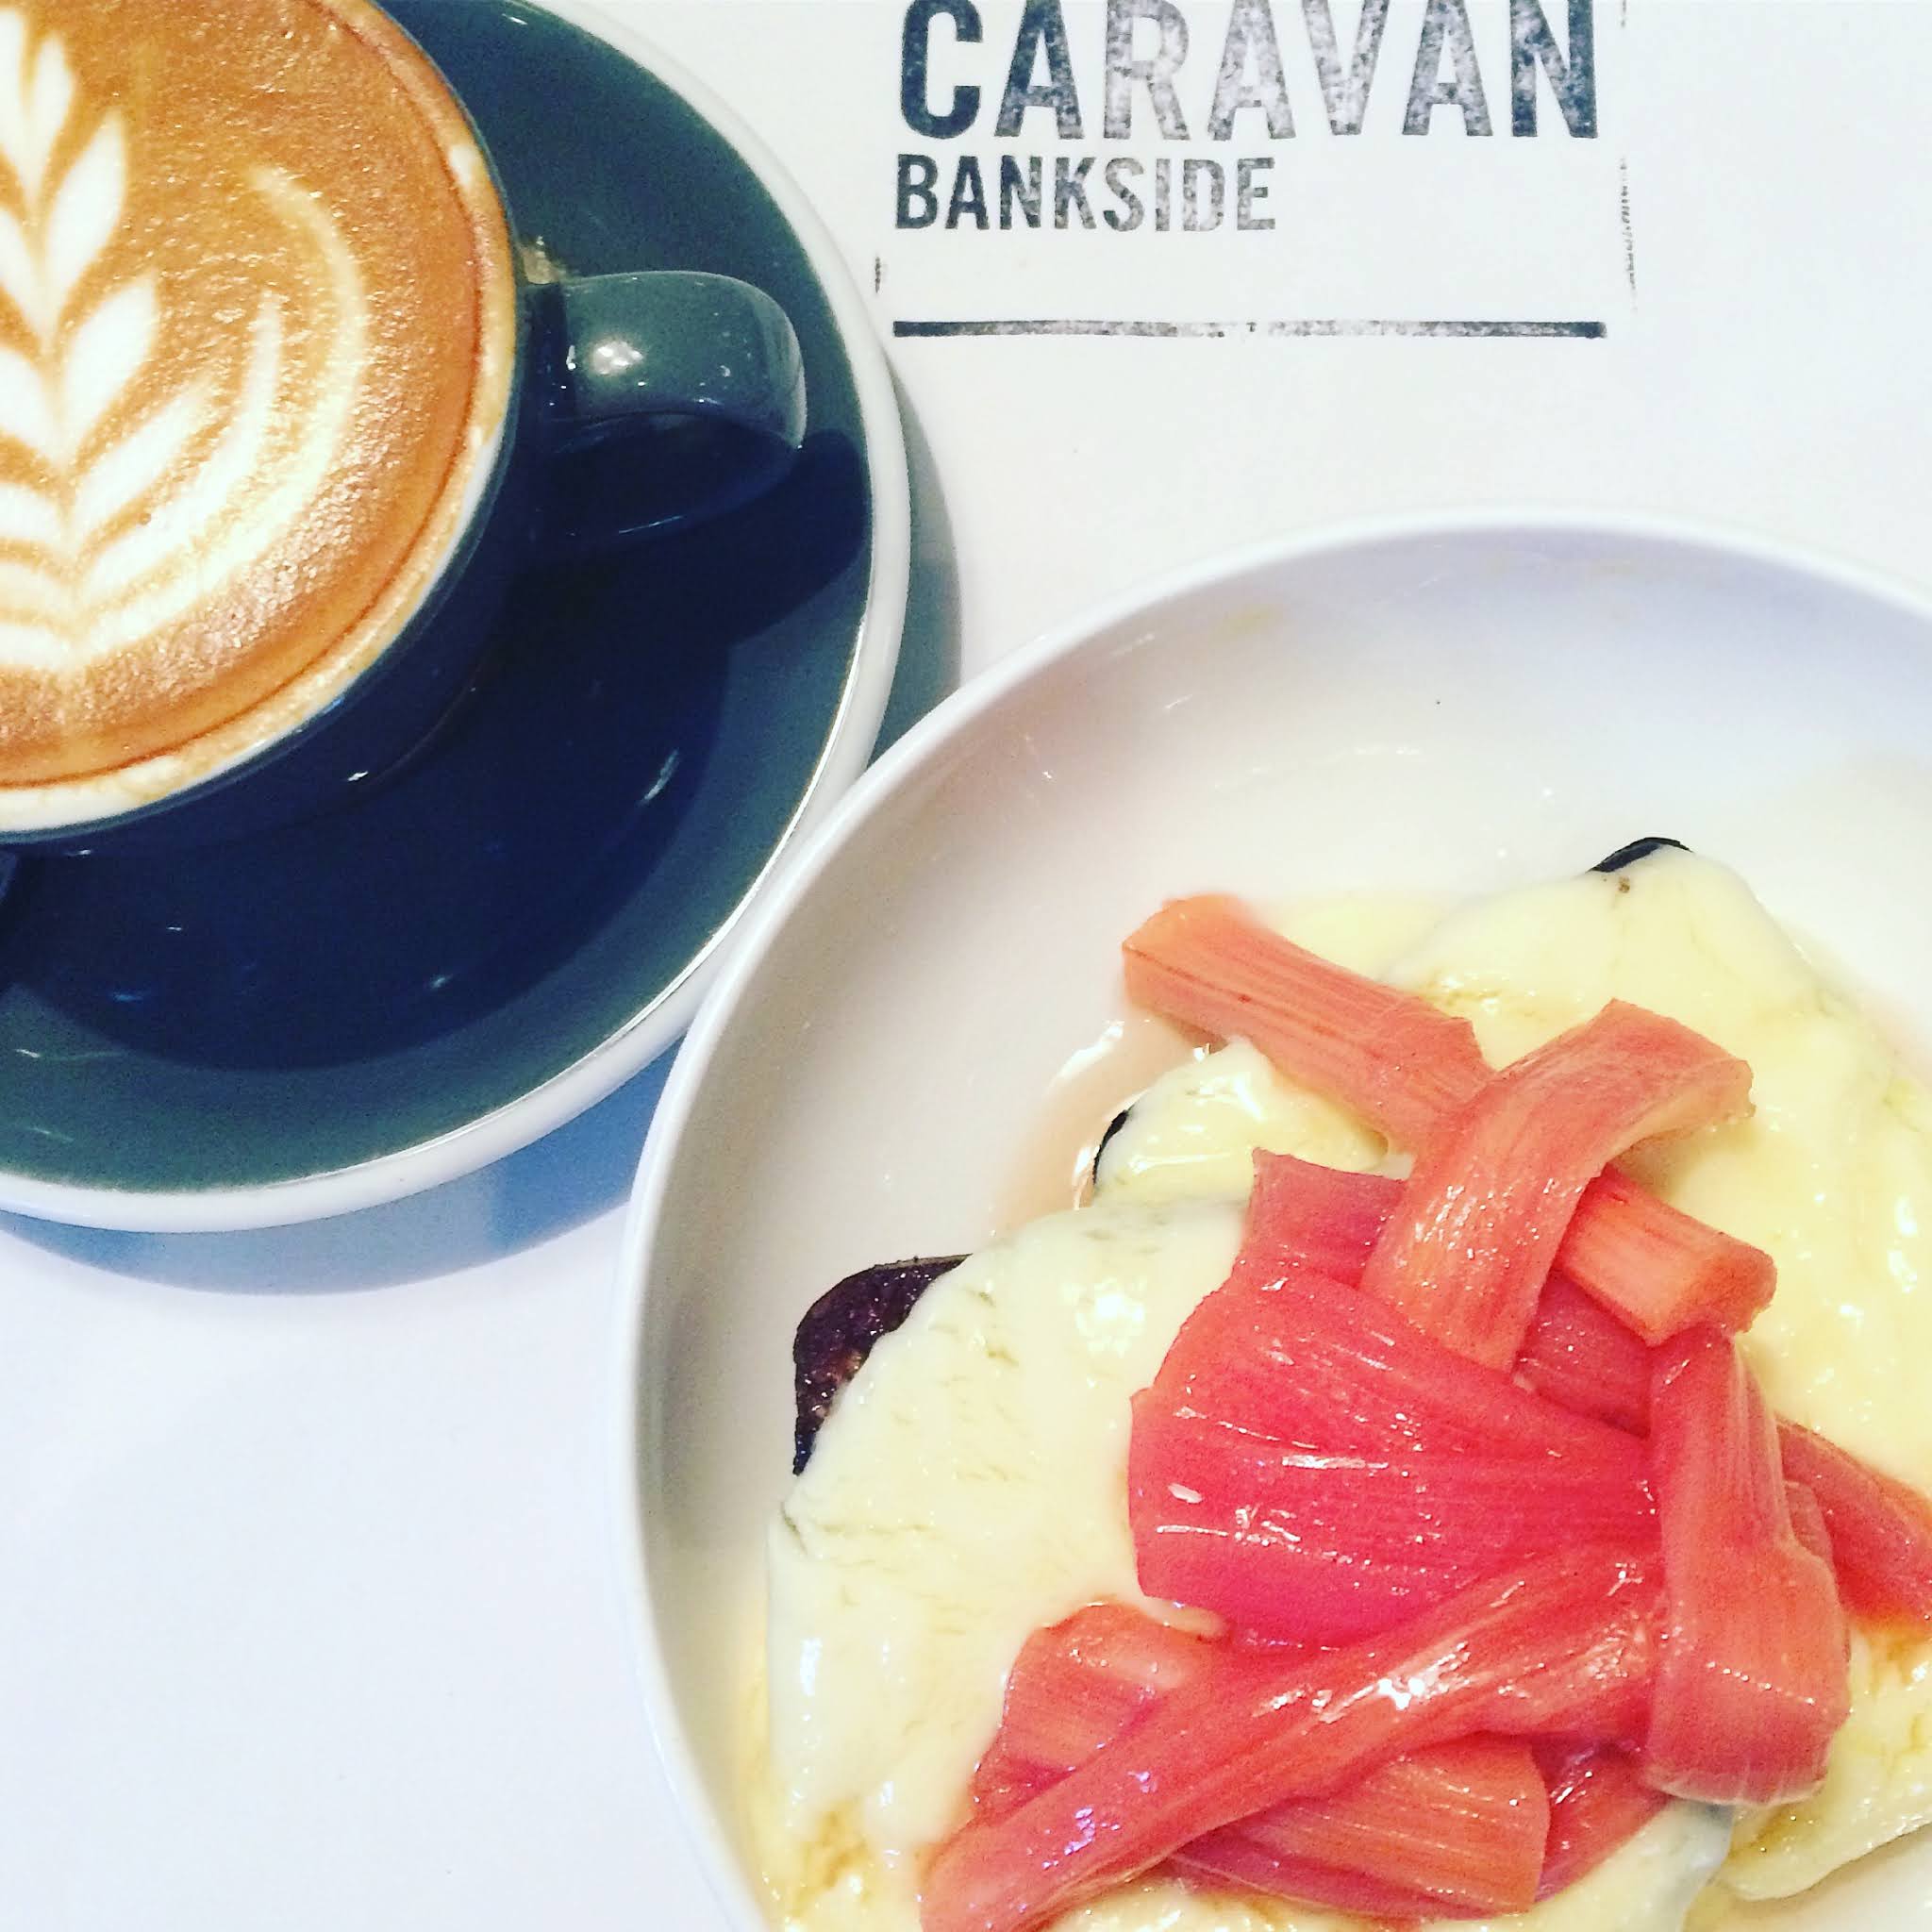 Coconut cake, custard and poached rhubarb at Caravan Bankside, one of the best brunch places in London bridge area